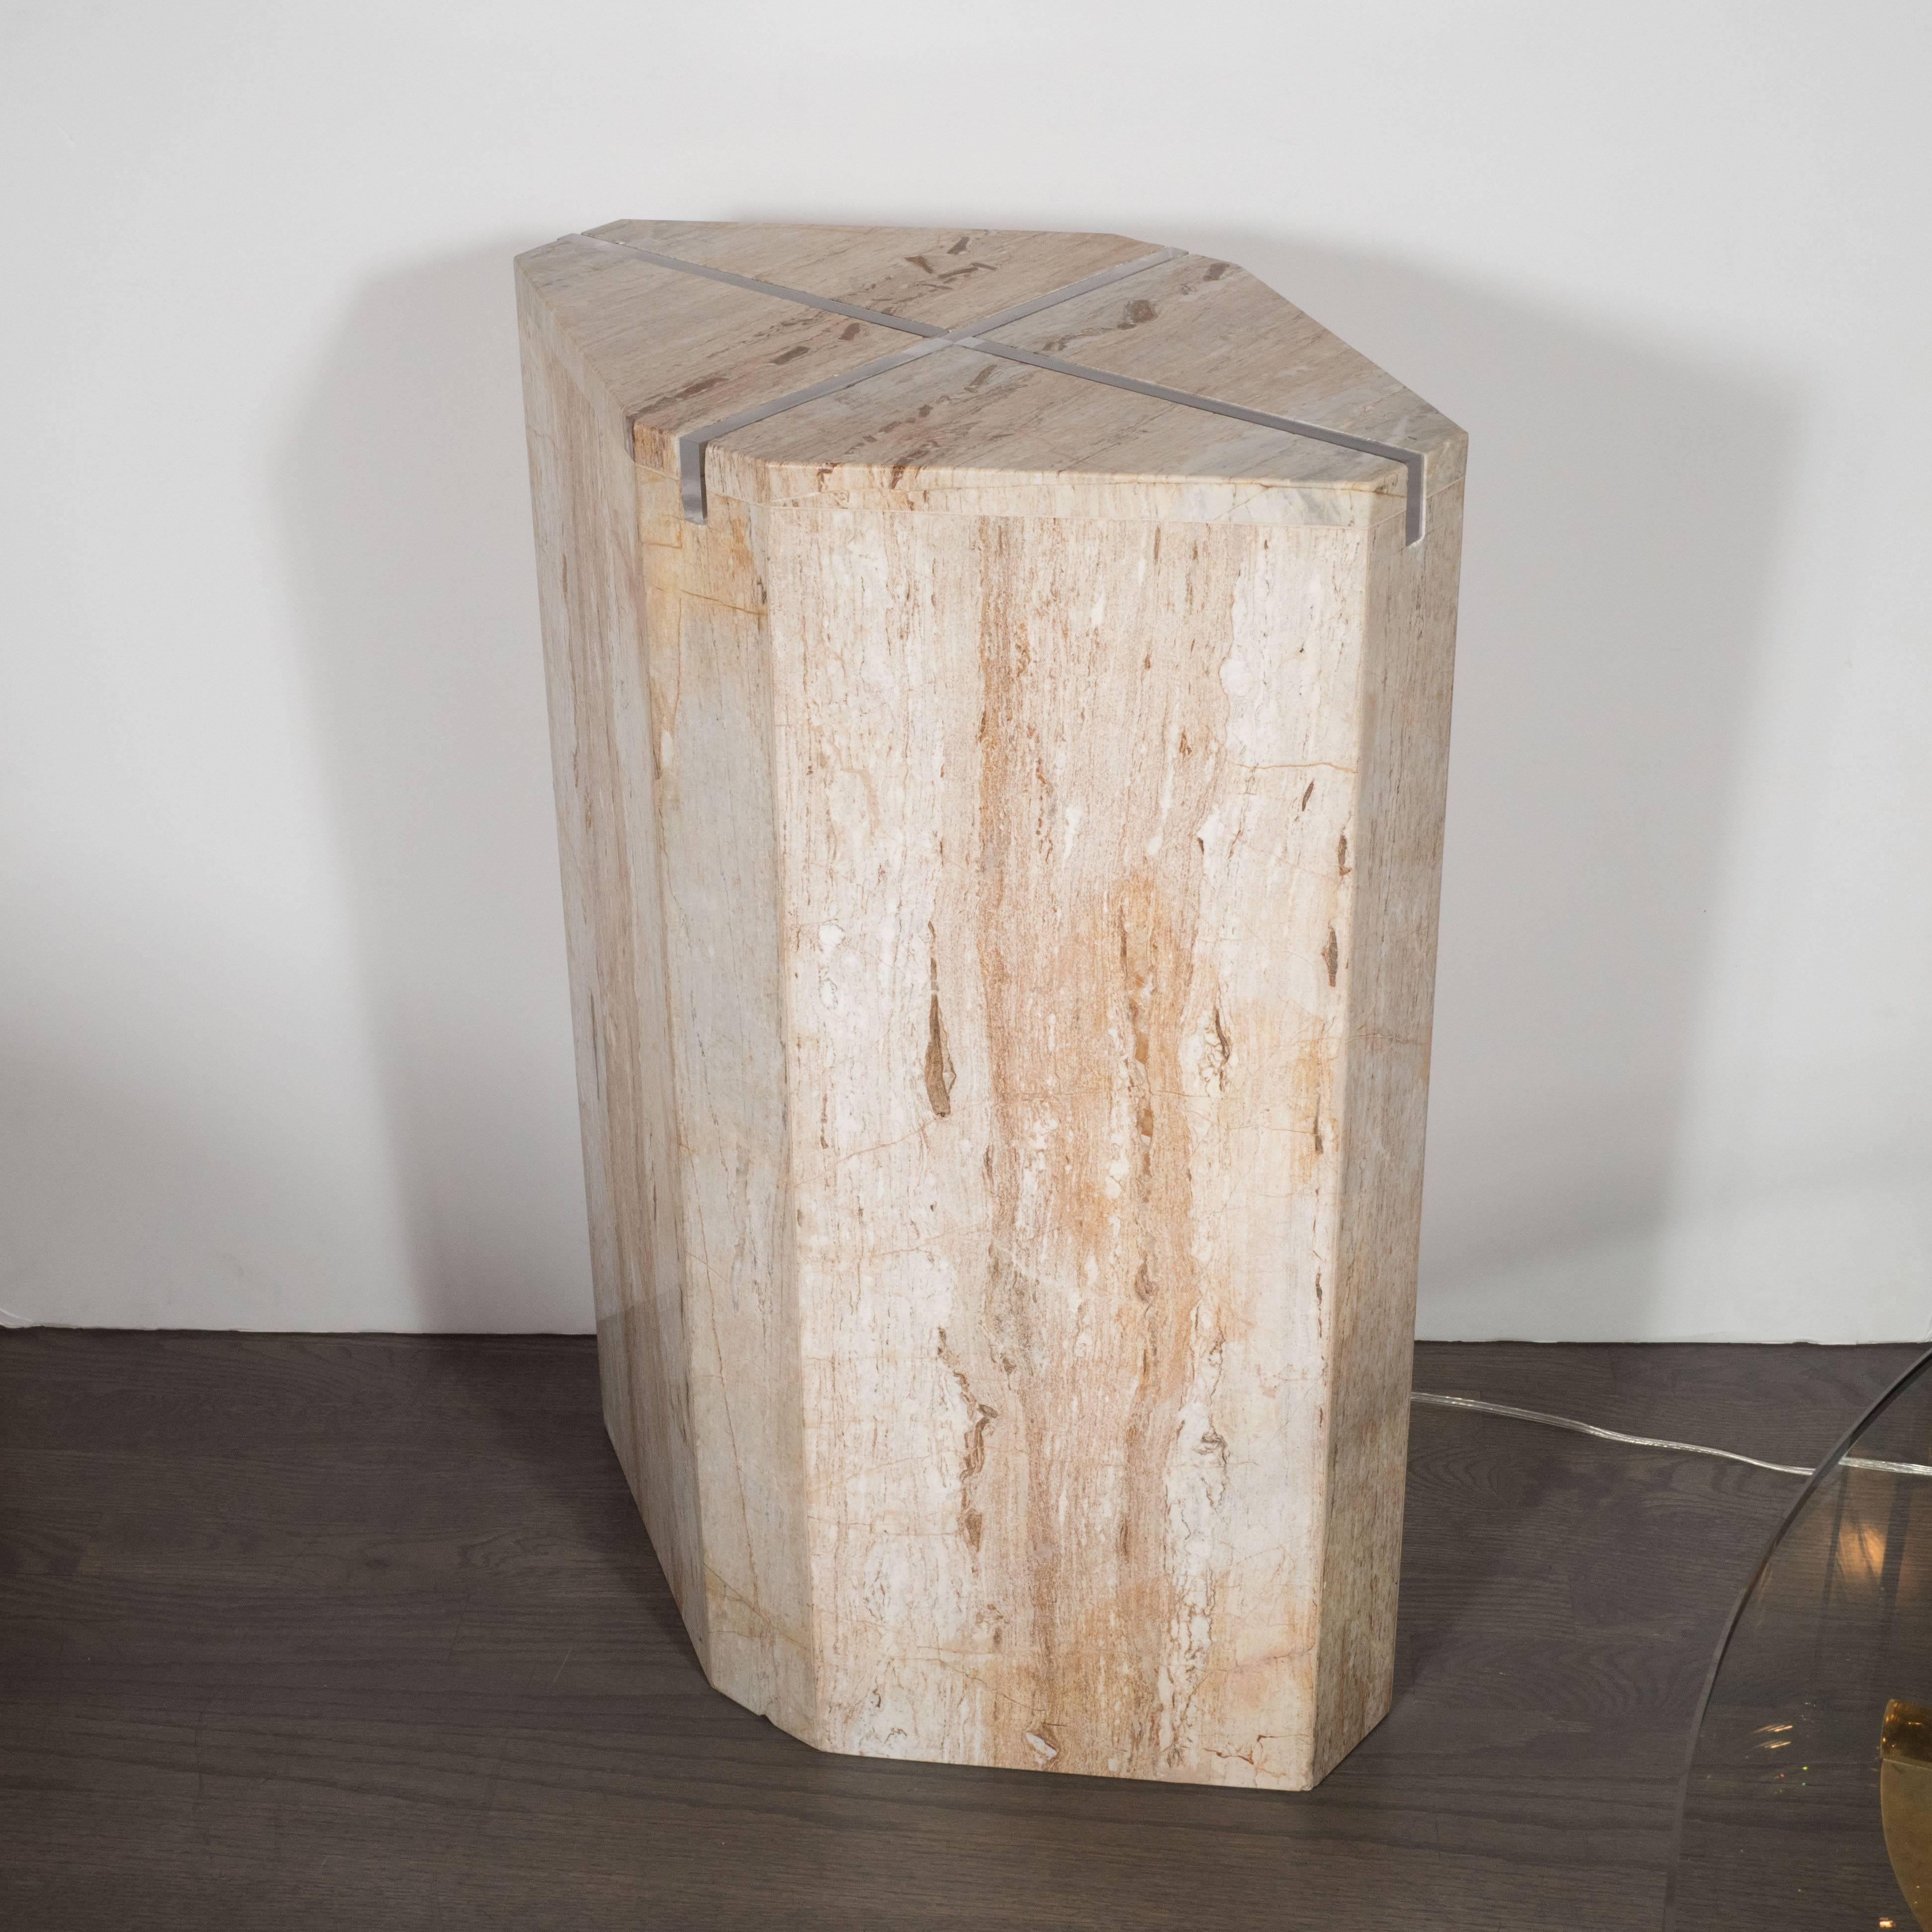 This refined pedestal is composed of an octagonally cut and perfectly polished slab of travertine marble with a cross-shaped illuminating insert in its center. The austere form highlights the inherent beauty of the marble- replete with hues of